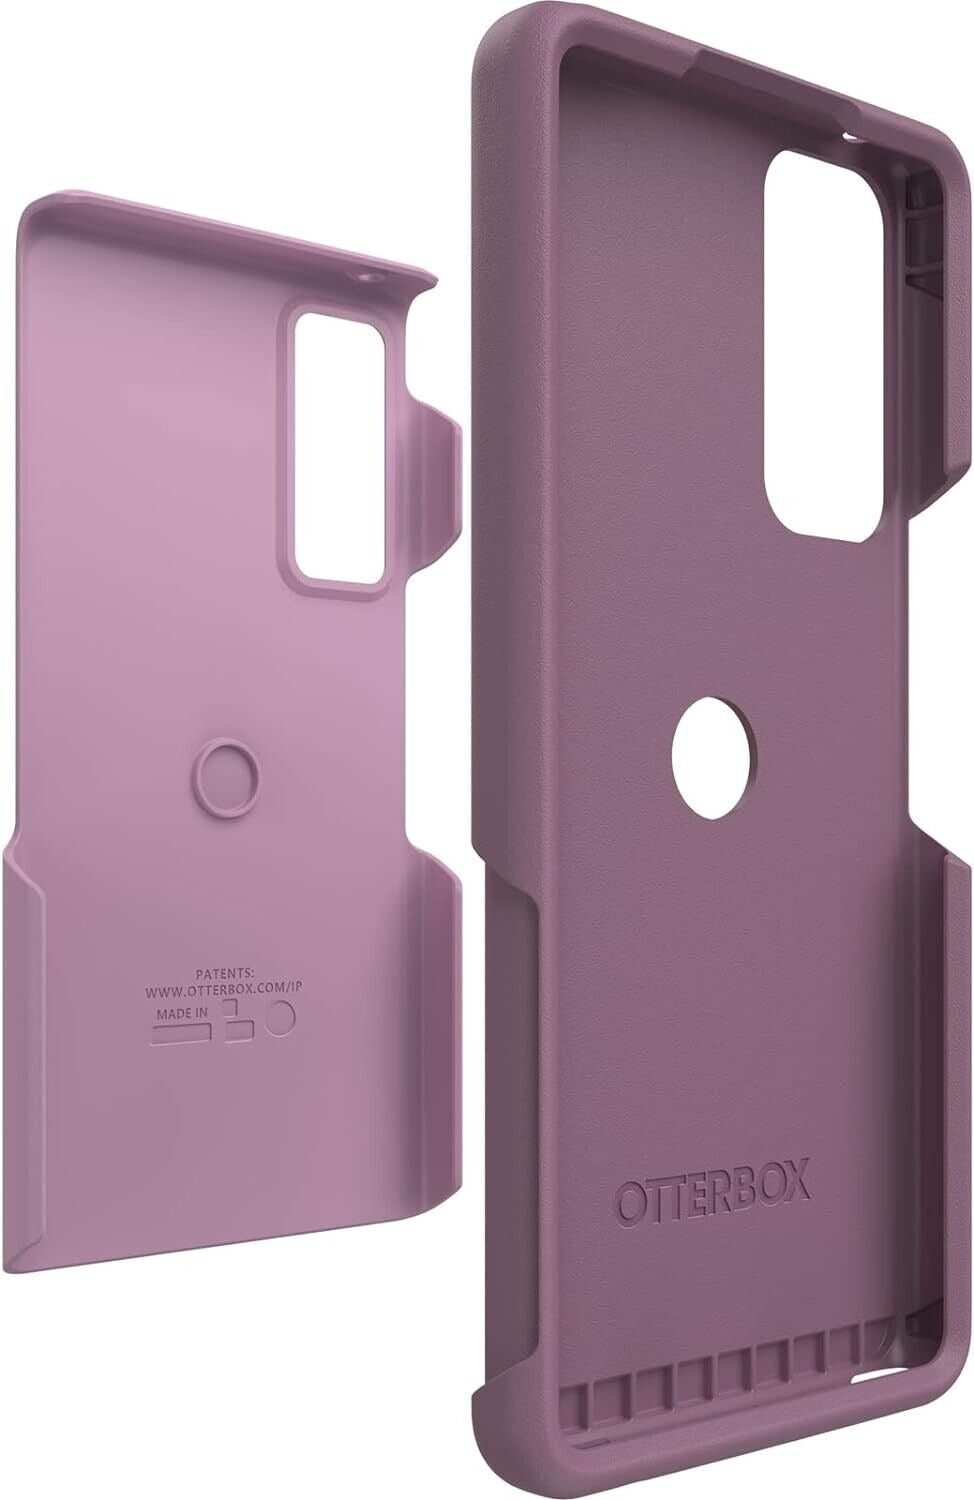 OtterBox COMMUTER LITE SERIES Case for TCL Stylus 5G - Maven Way (New)